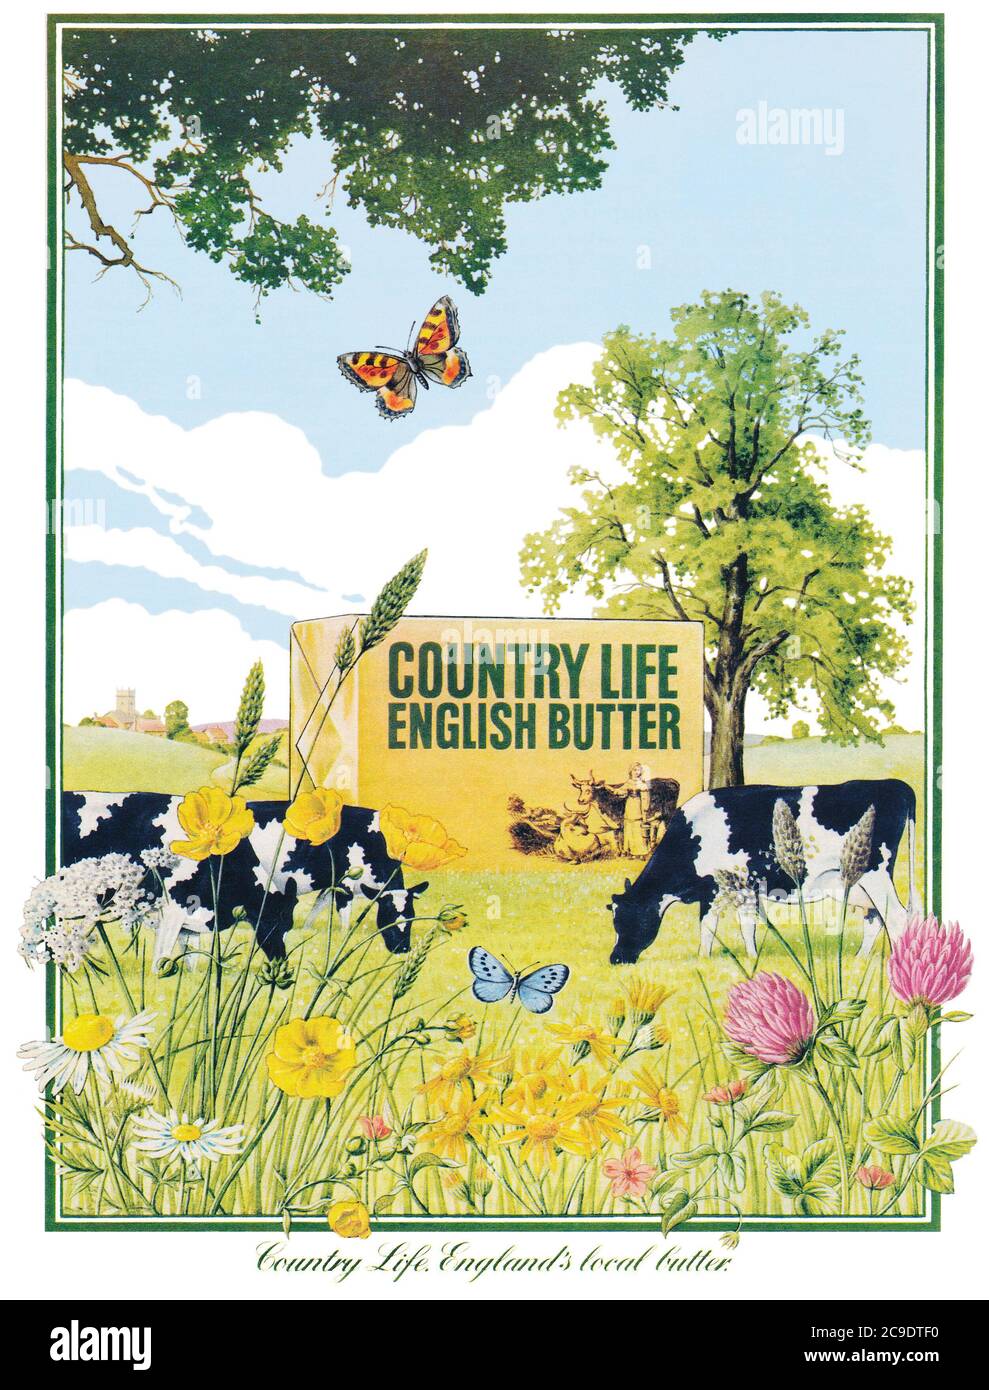 1975 British advertisement for Country Life English butter. Stock Photo